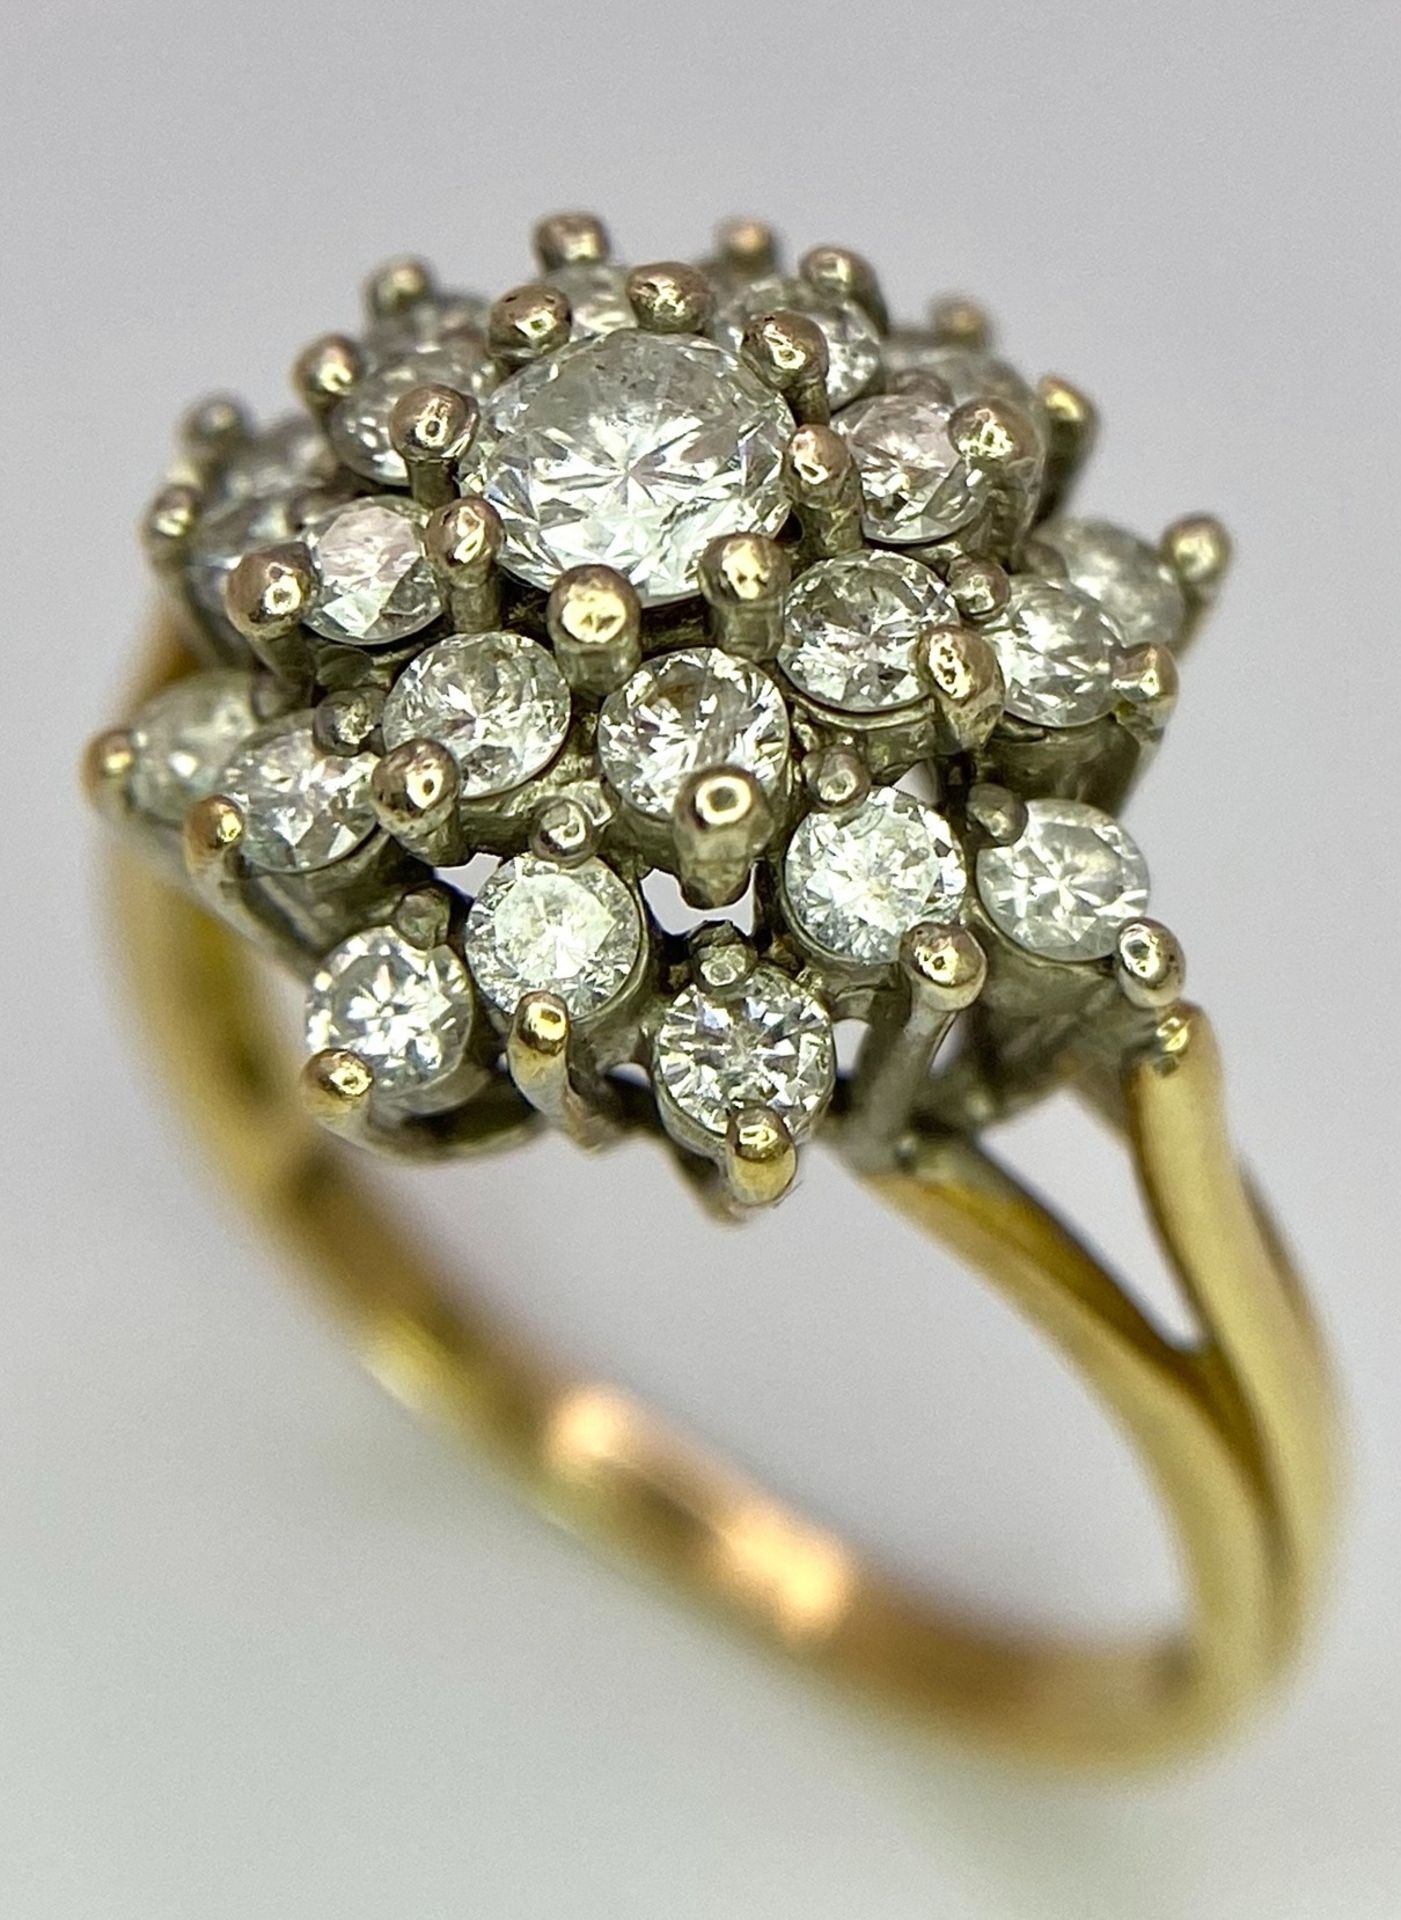 AN 18K YELLOW GOLD DIAMOND CLUSTER RING - 1CTW. 4.2G. SIZE L 1/2. - Image 5 of 7